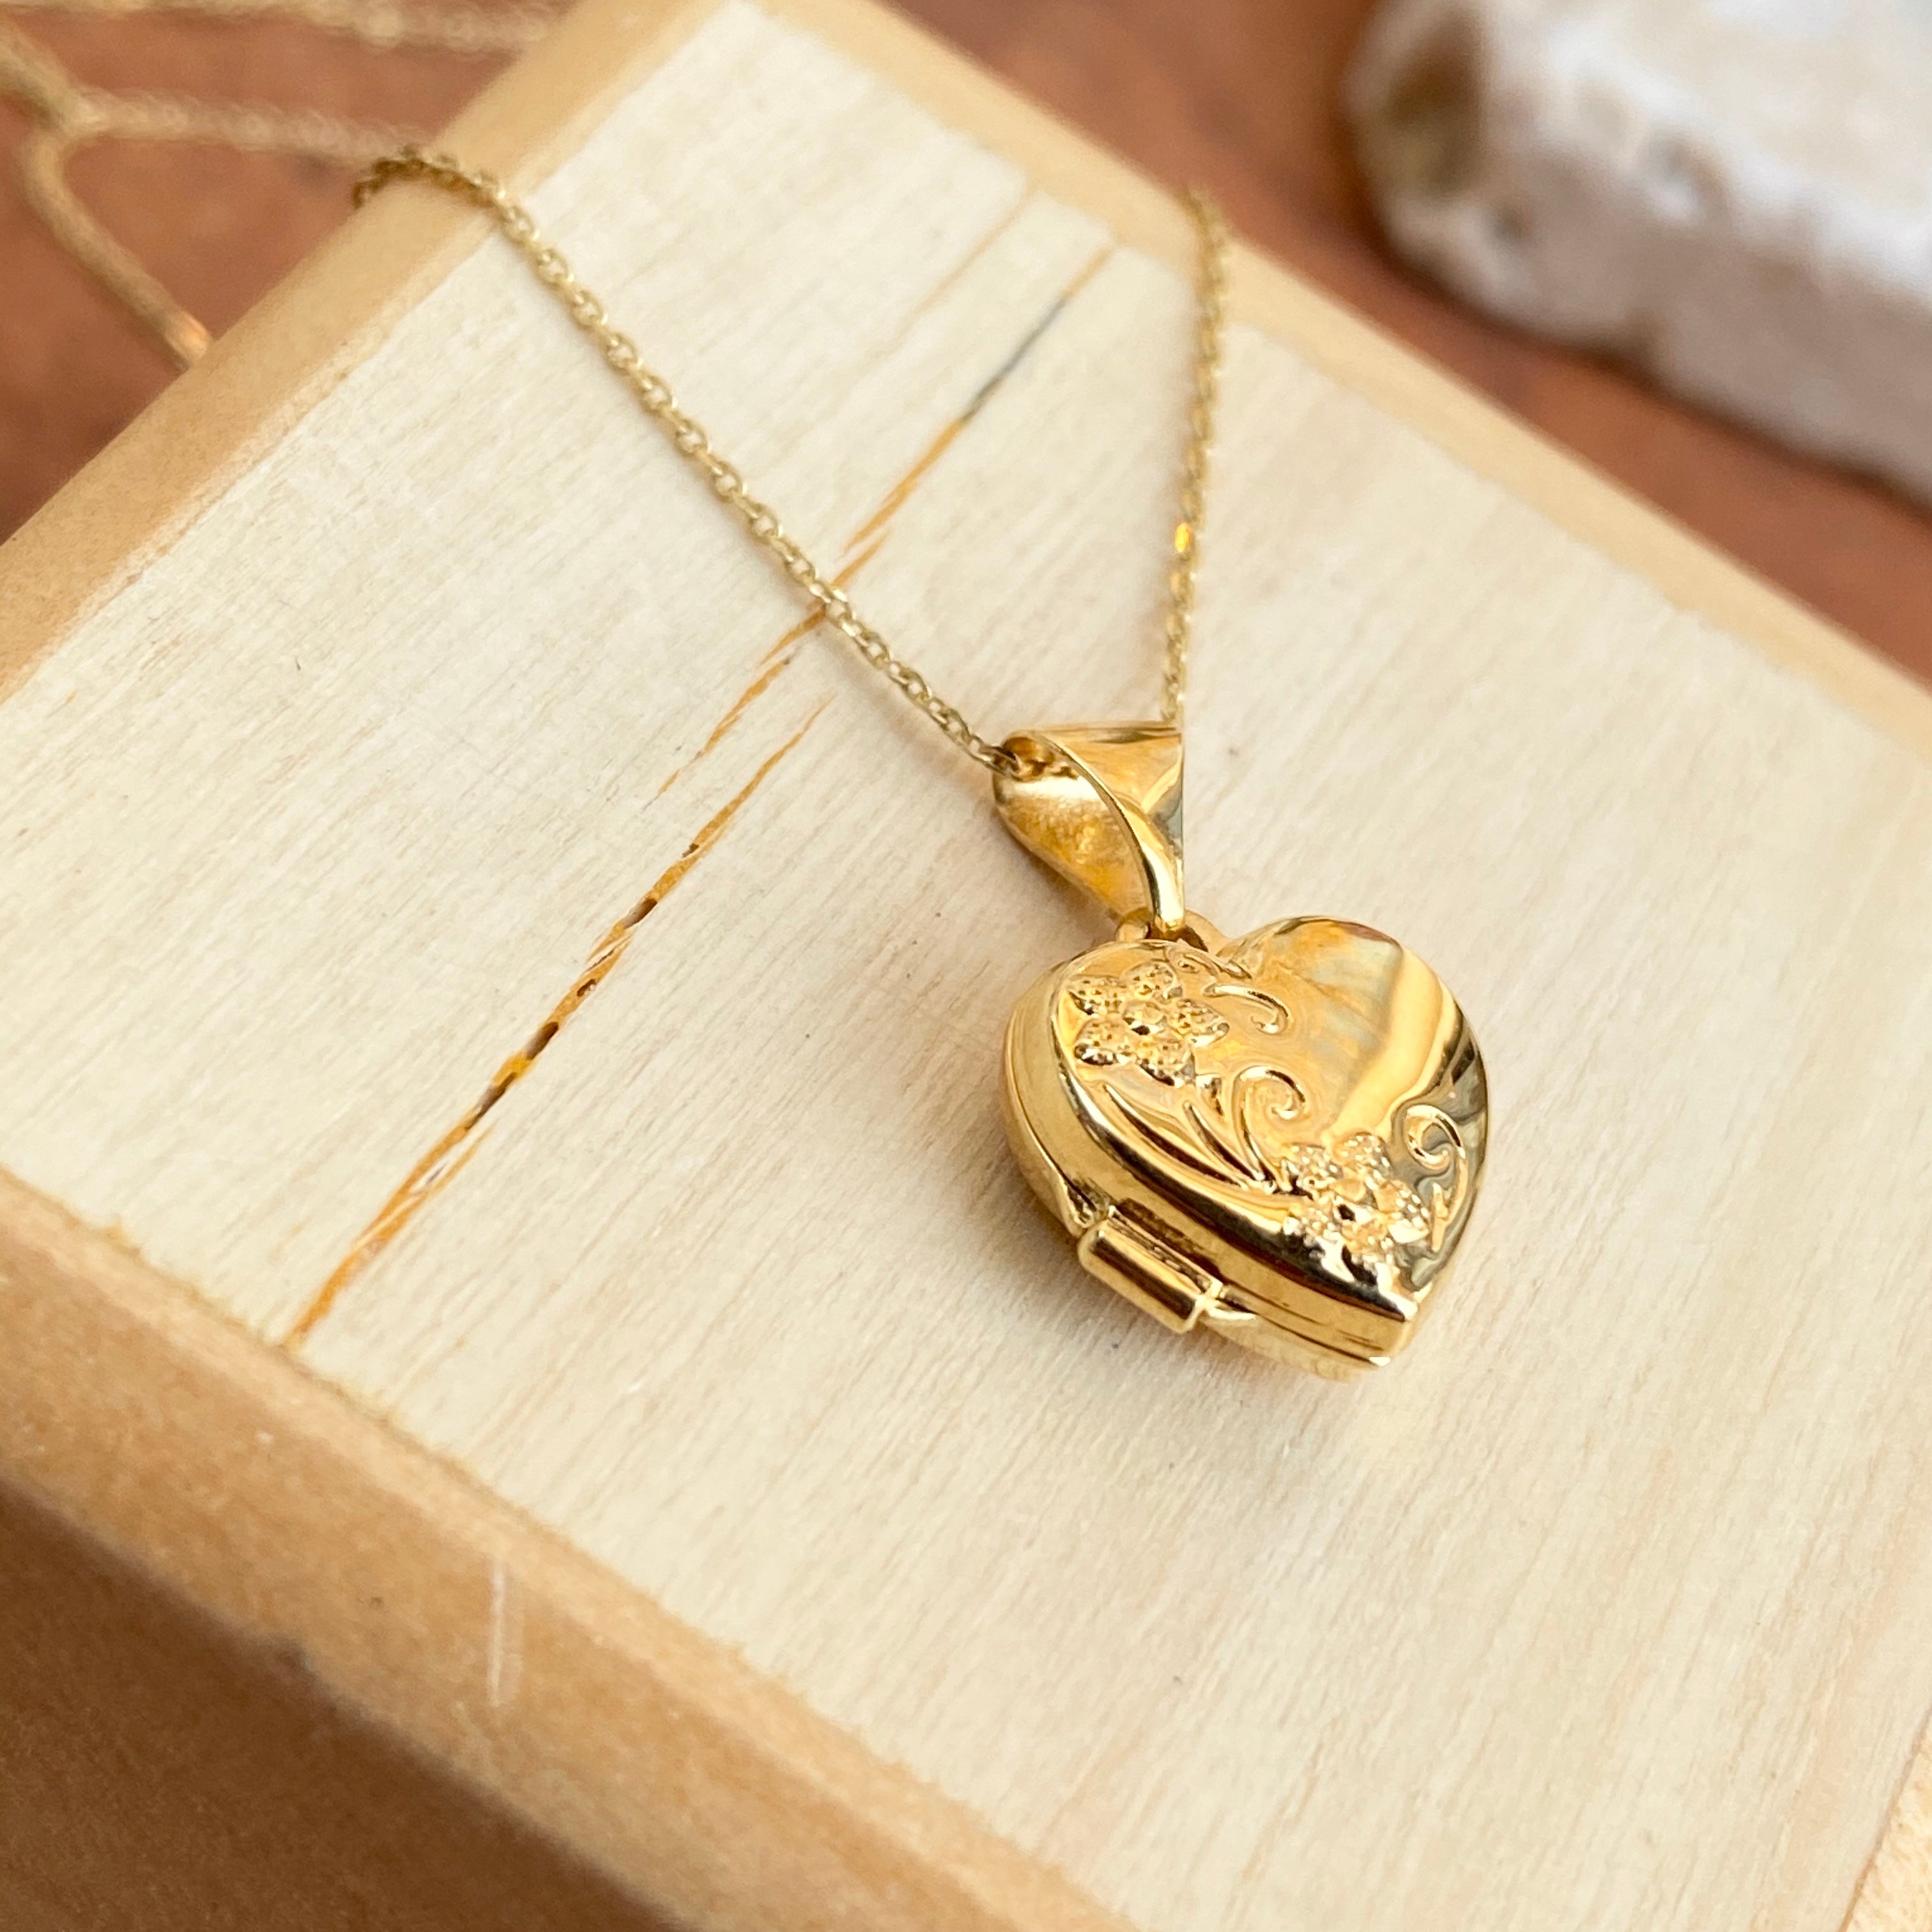 9ct Gold Heart Locket And Chain - R7252 | F.Hinds Jewellers